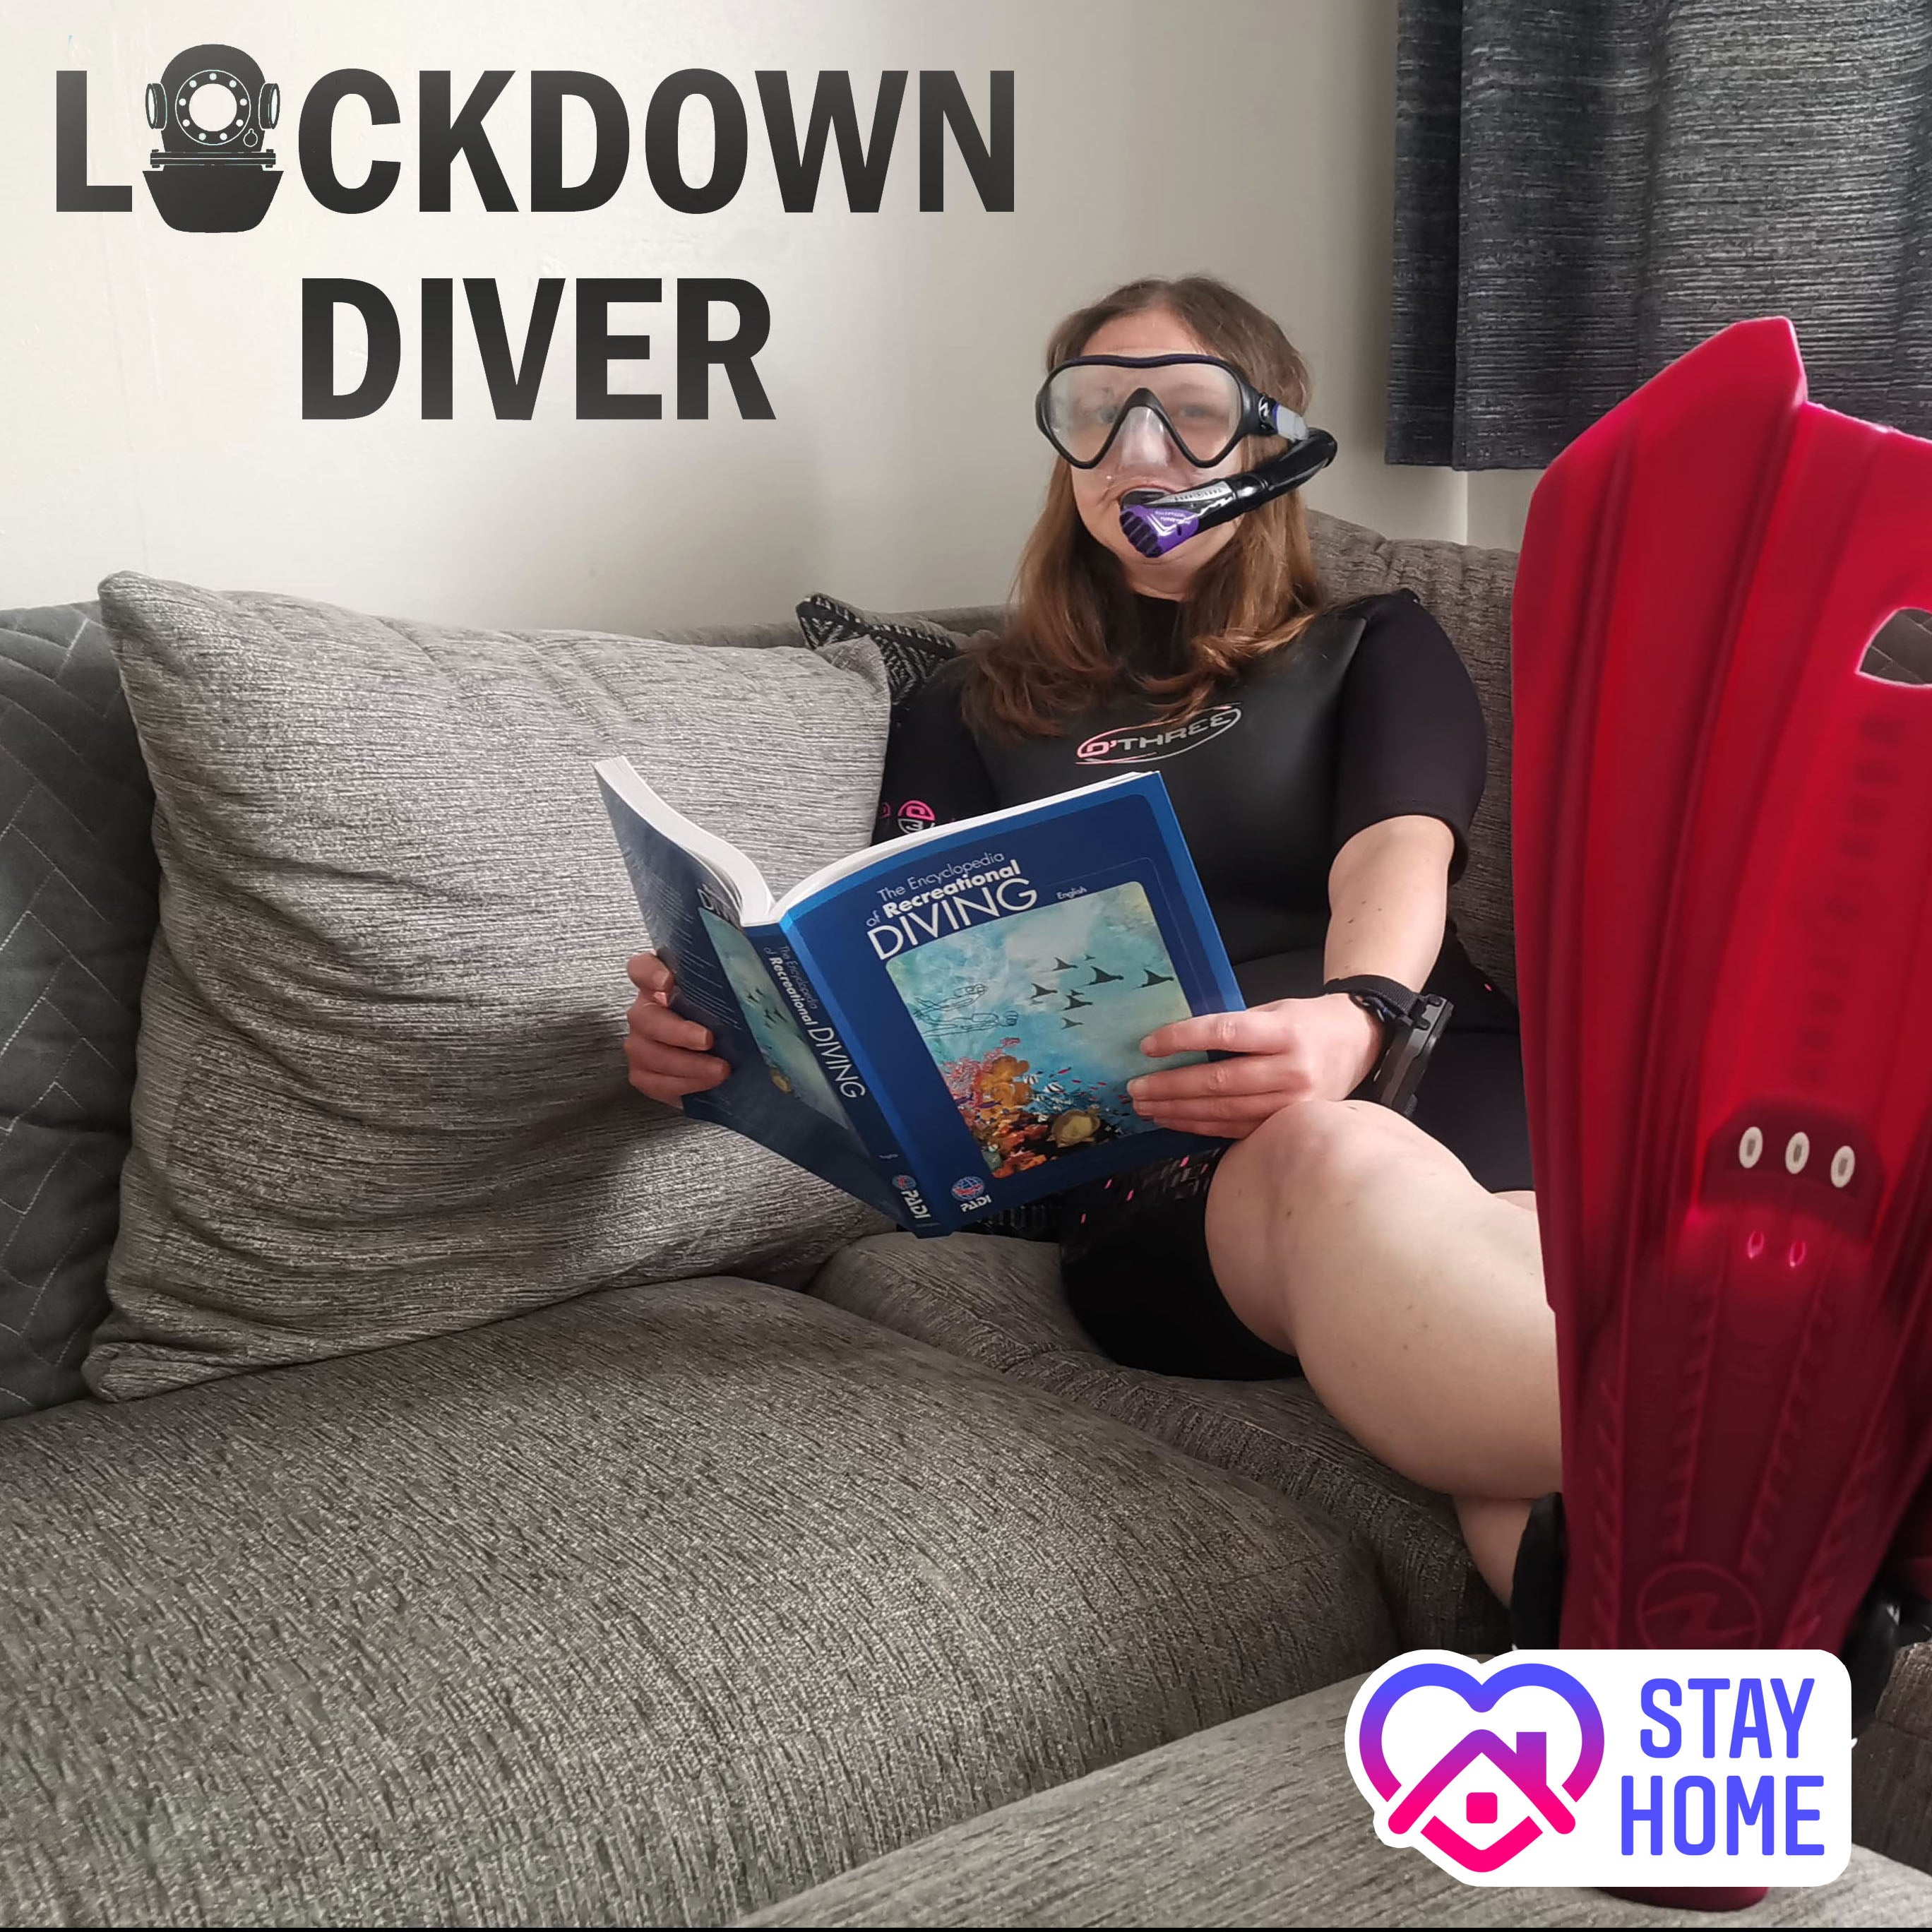 LOCKDOWN DIVER - Things To Do